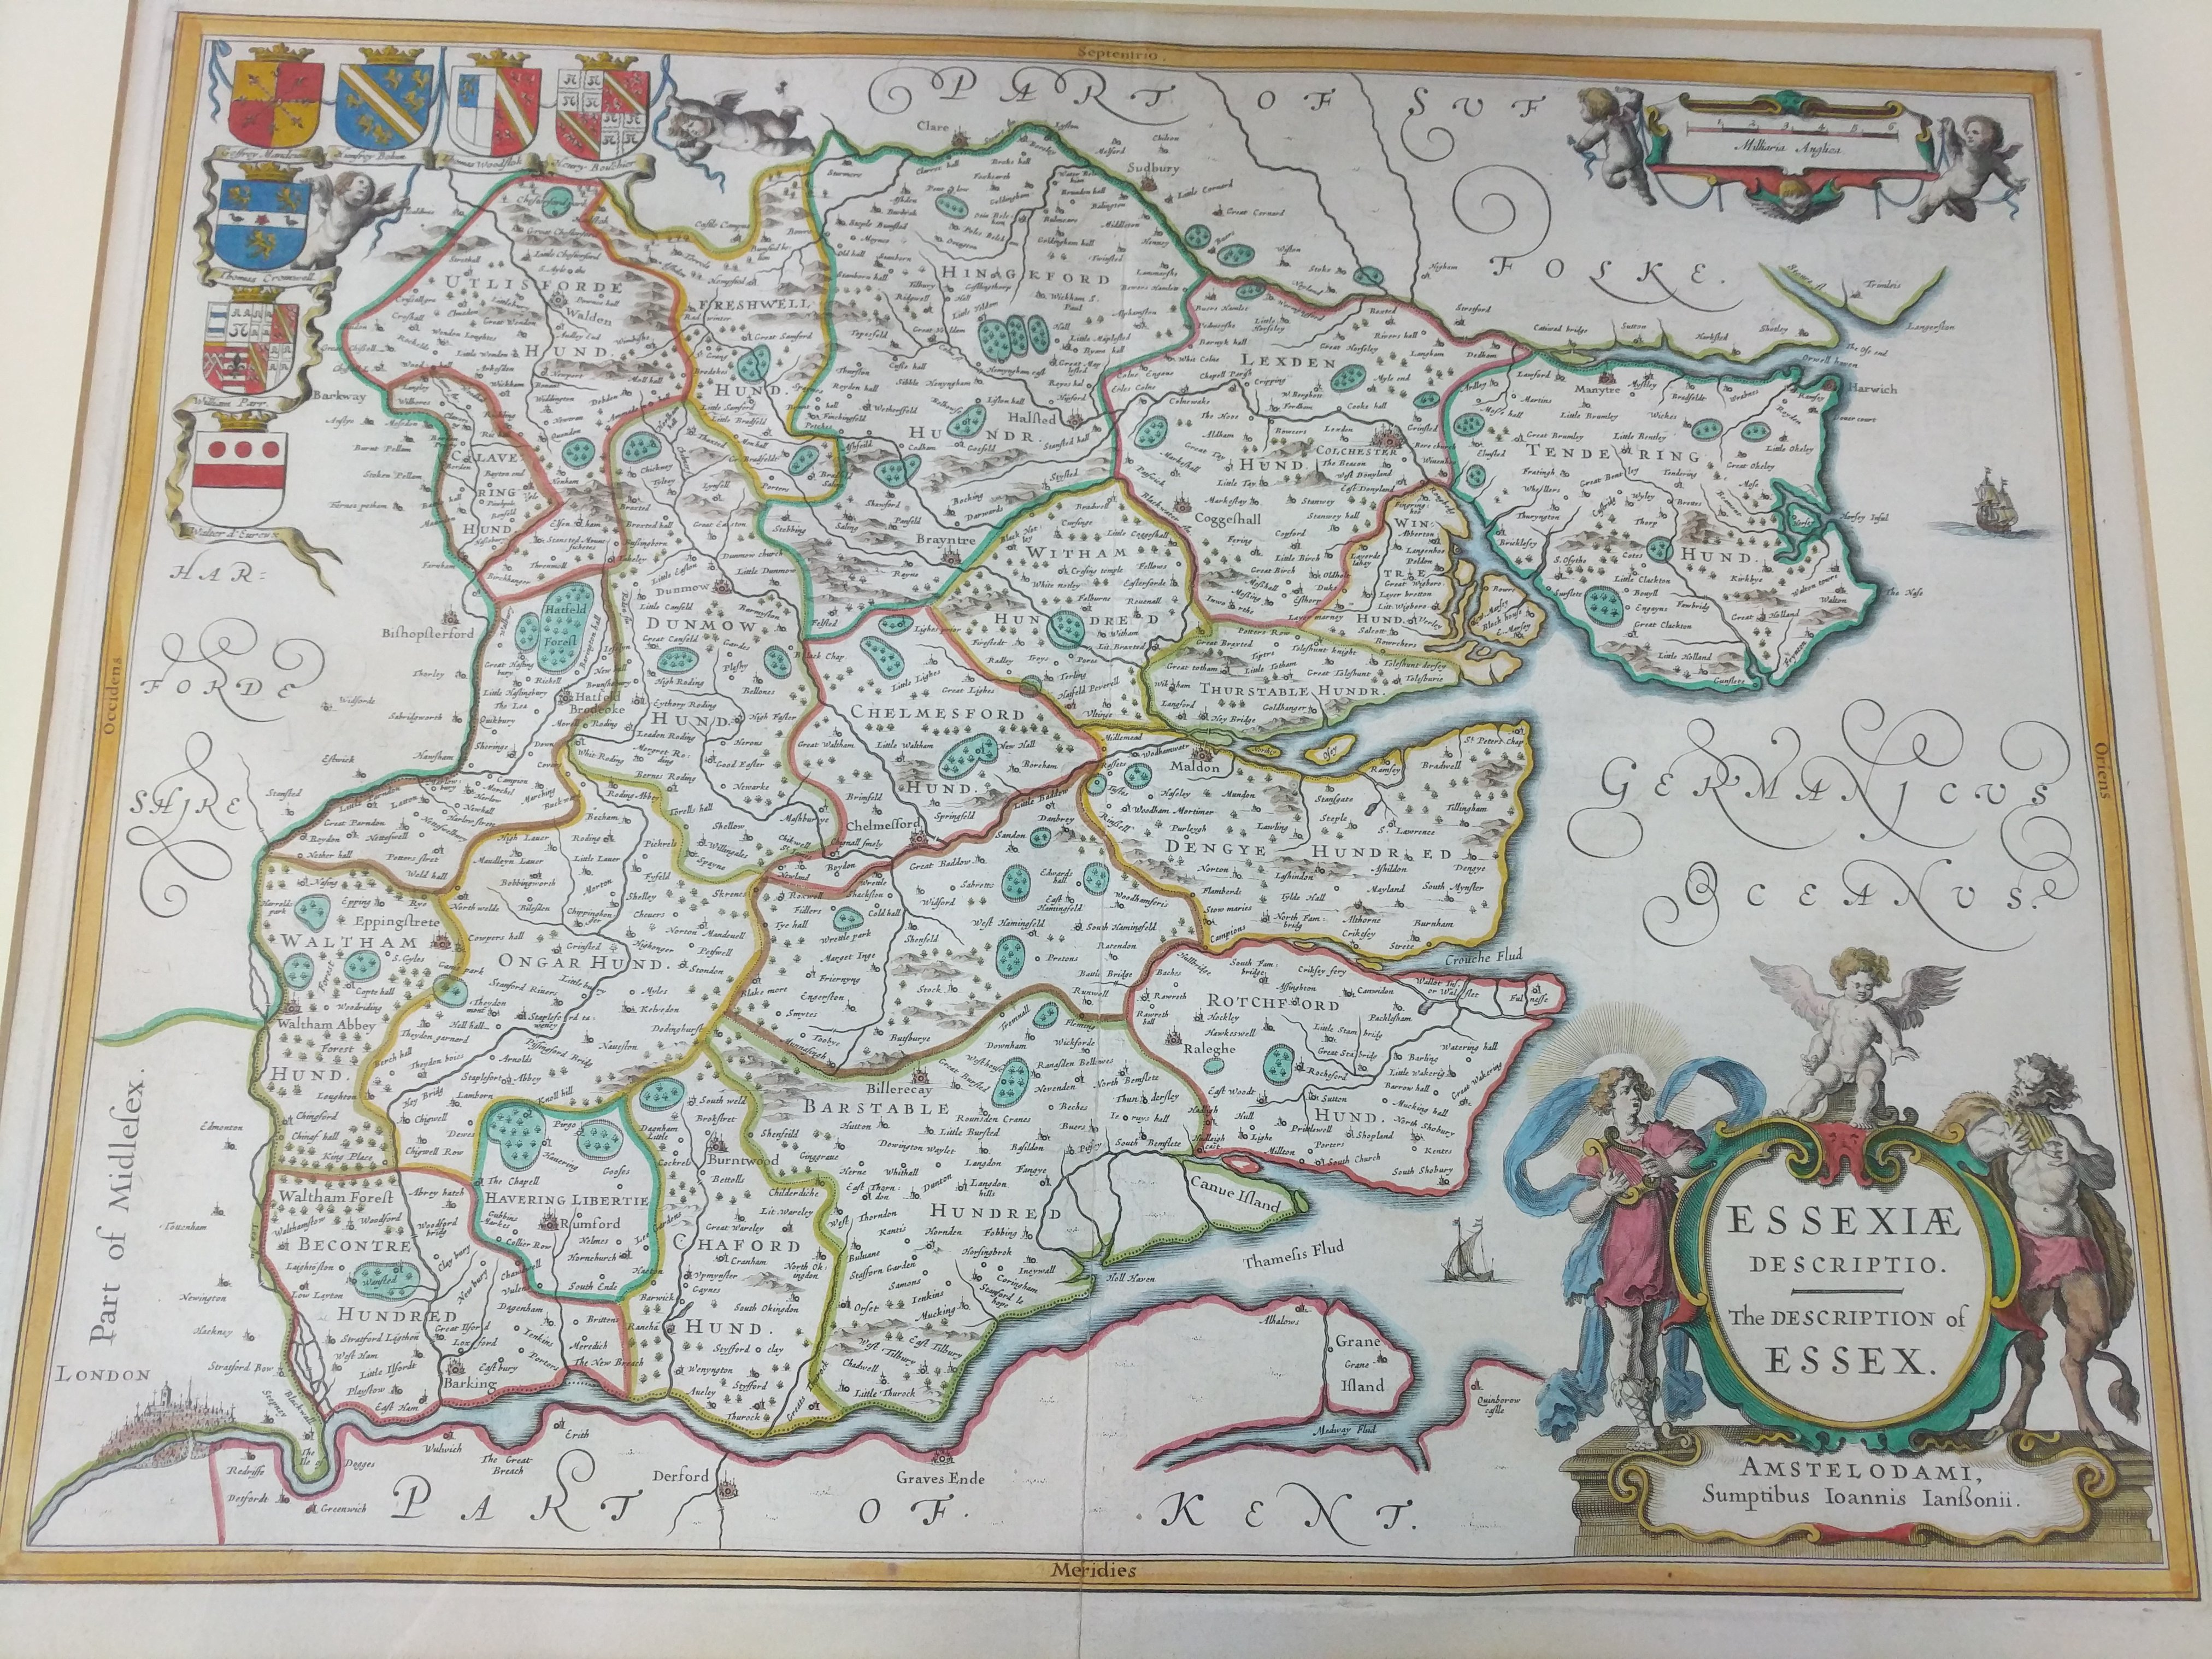 A framed map of Essex titled "Essex Description" from the late 17th or 18th century.